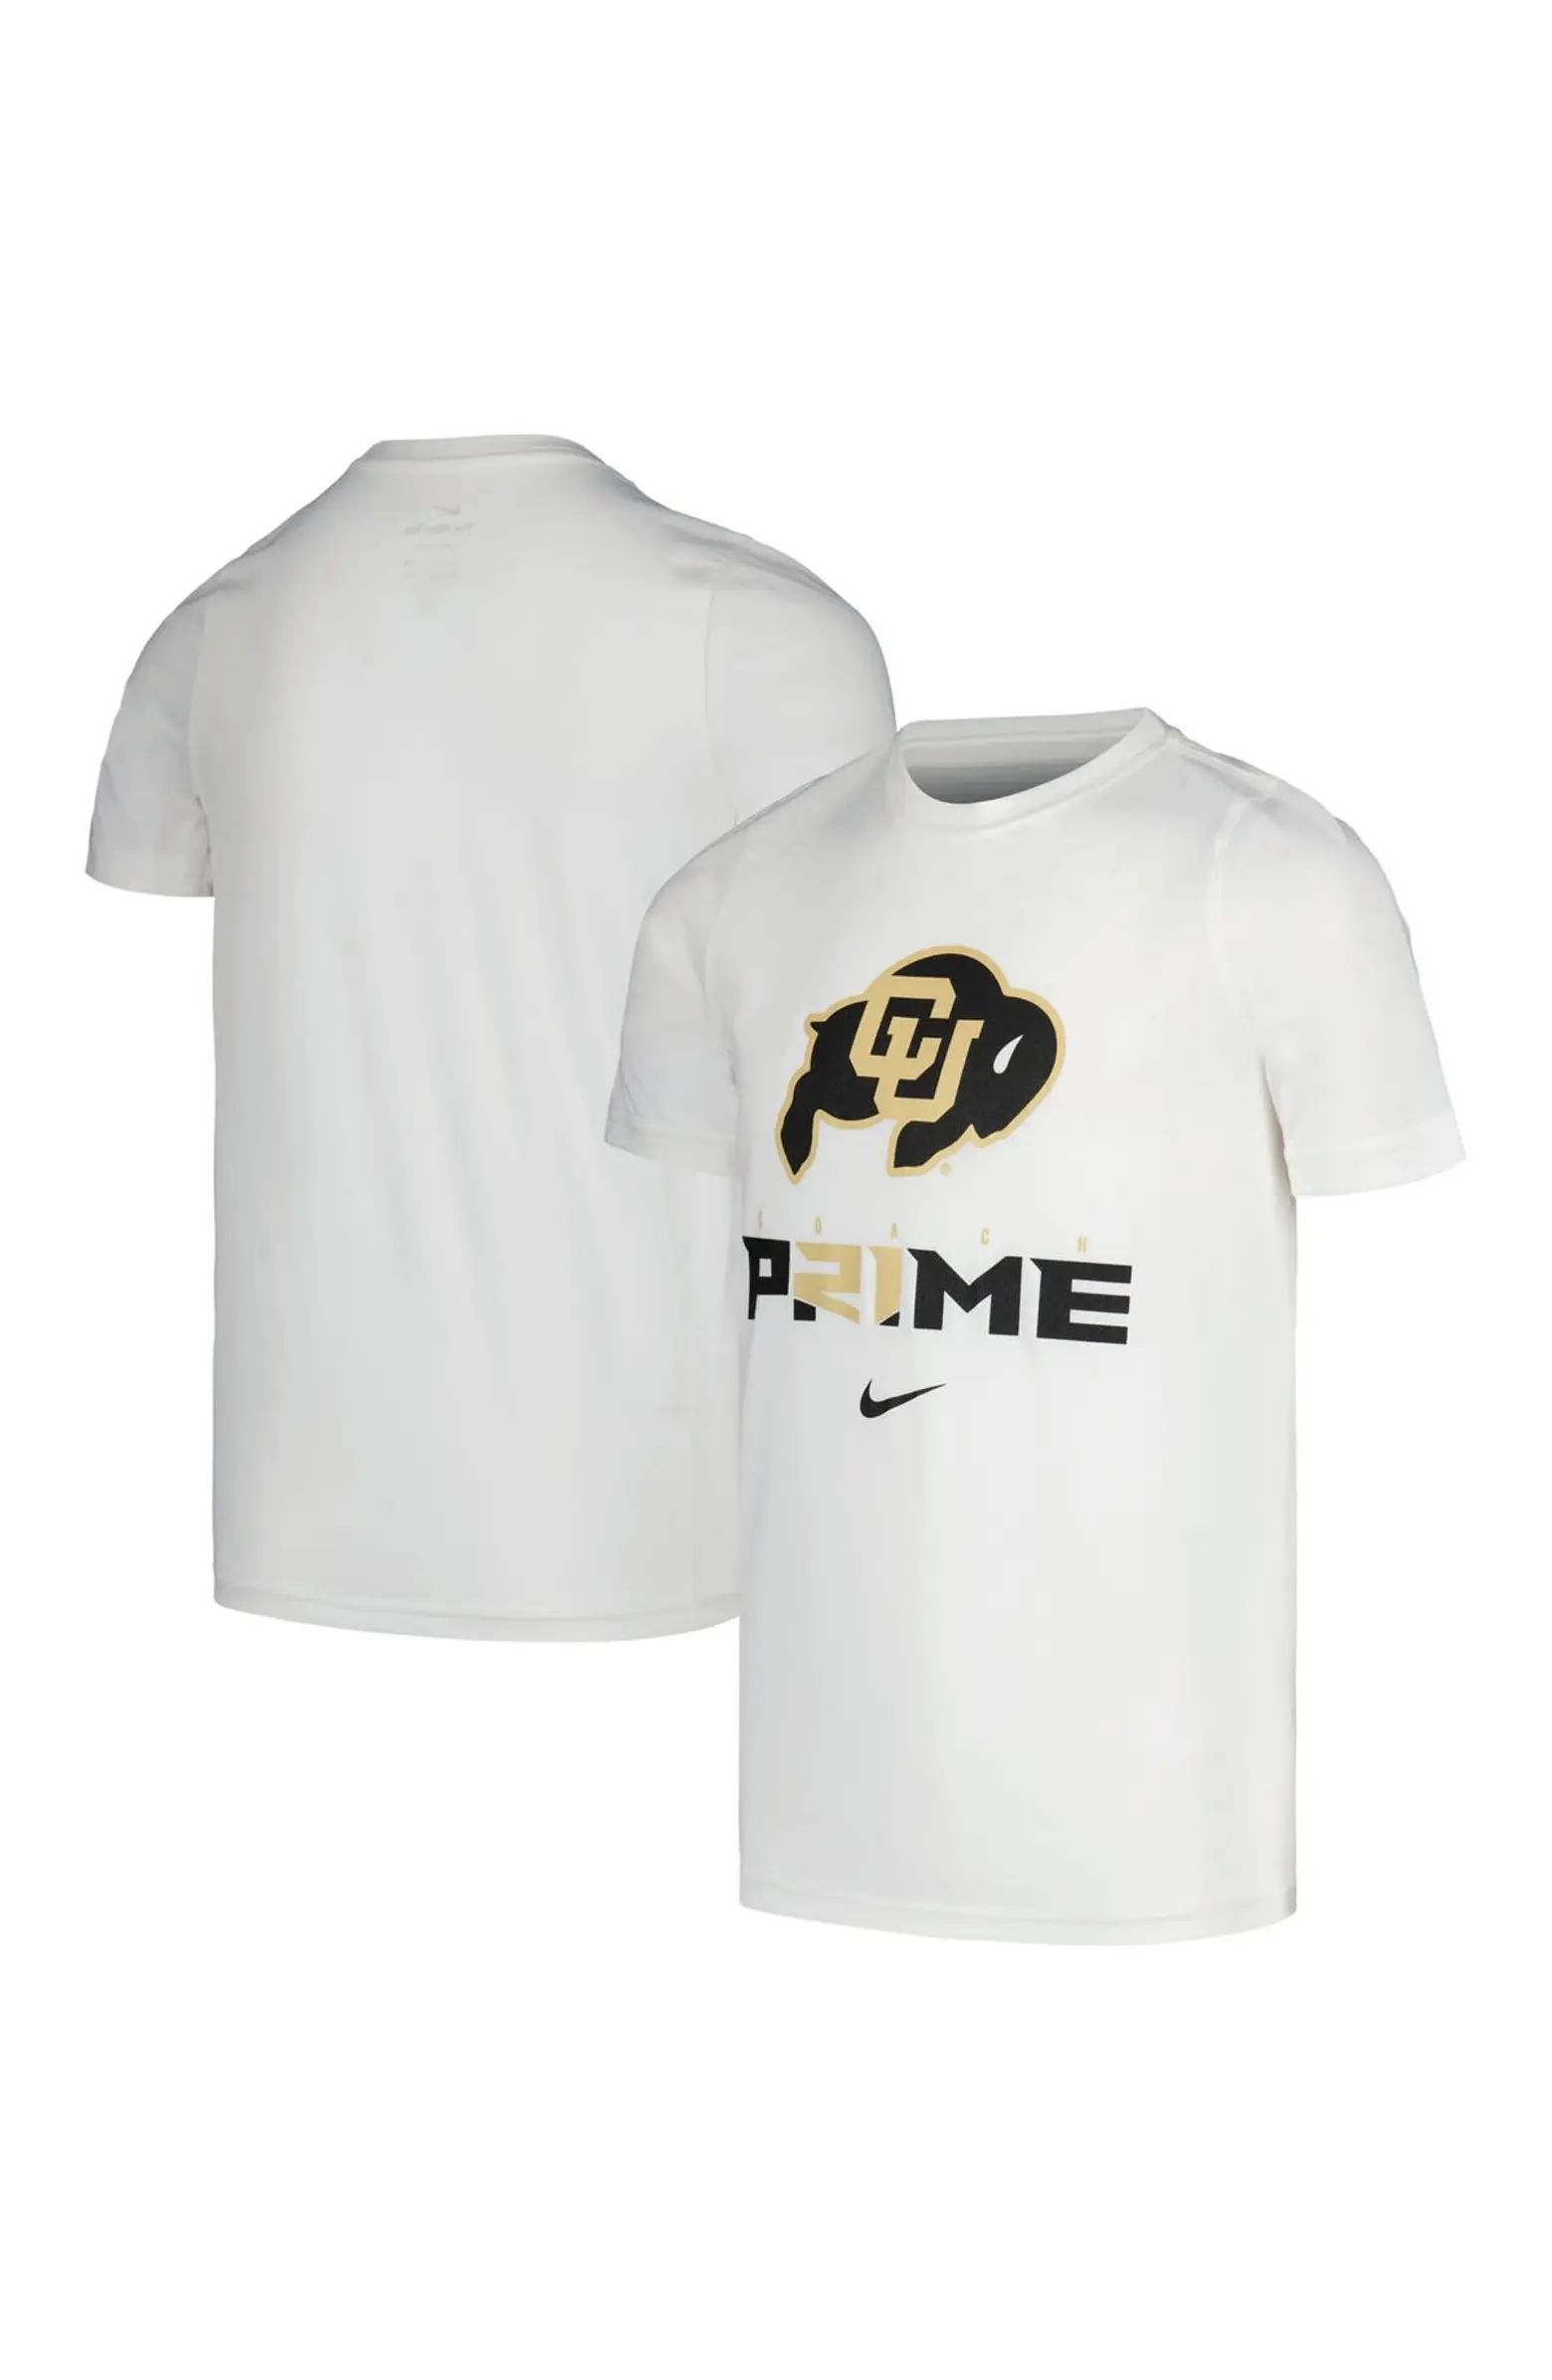 Youth Nike White Colorado Buffaloes Coach Prime Legend Performance T-Shirt | Nordstrom